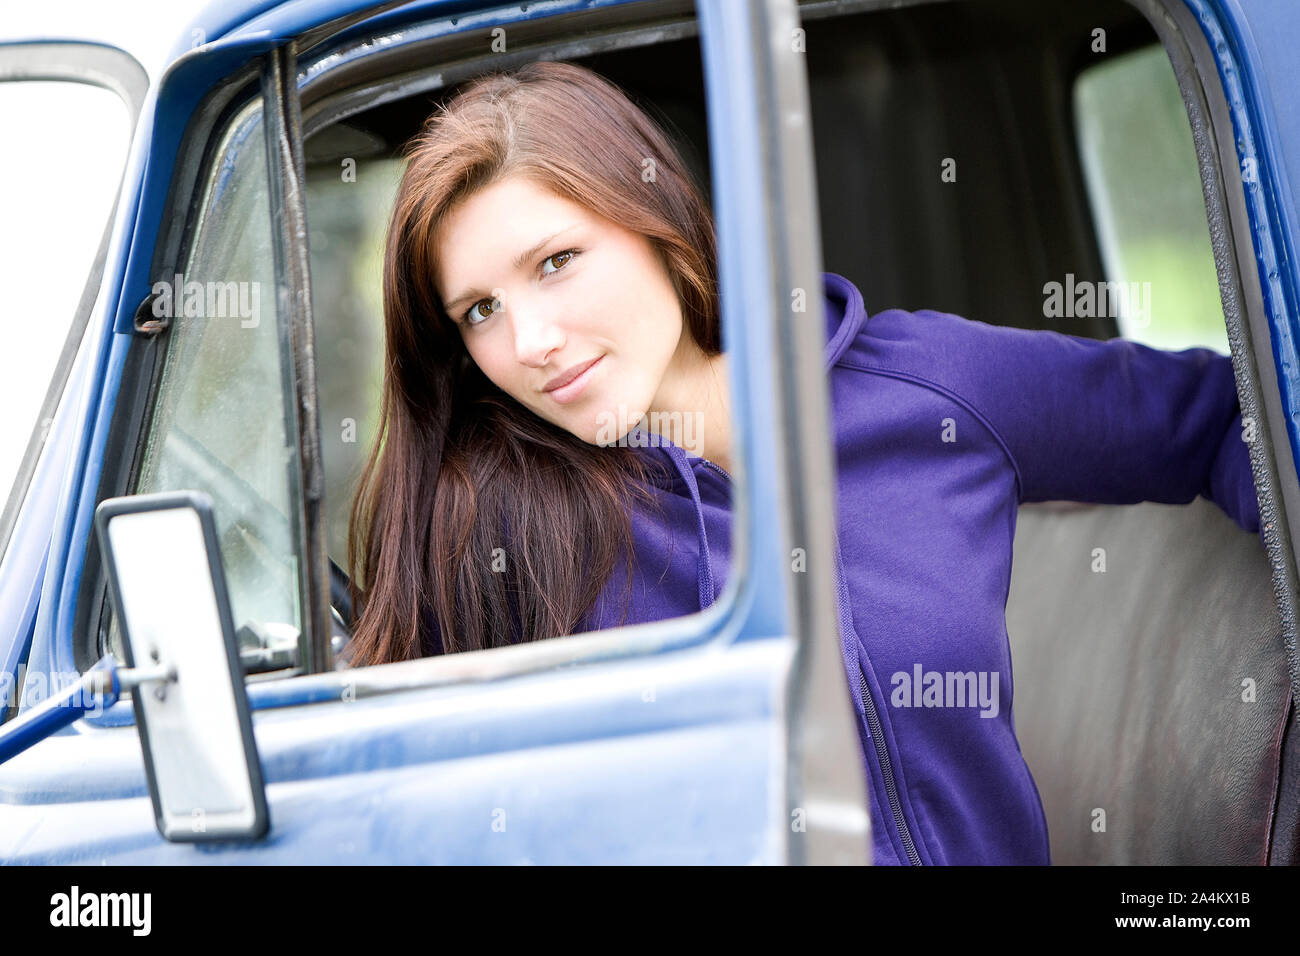 Portrait Of Women Sitting In Car, Outdoors Stock Photo